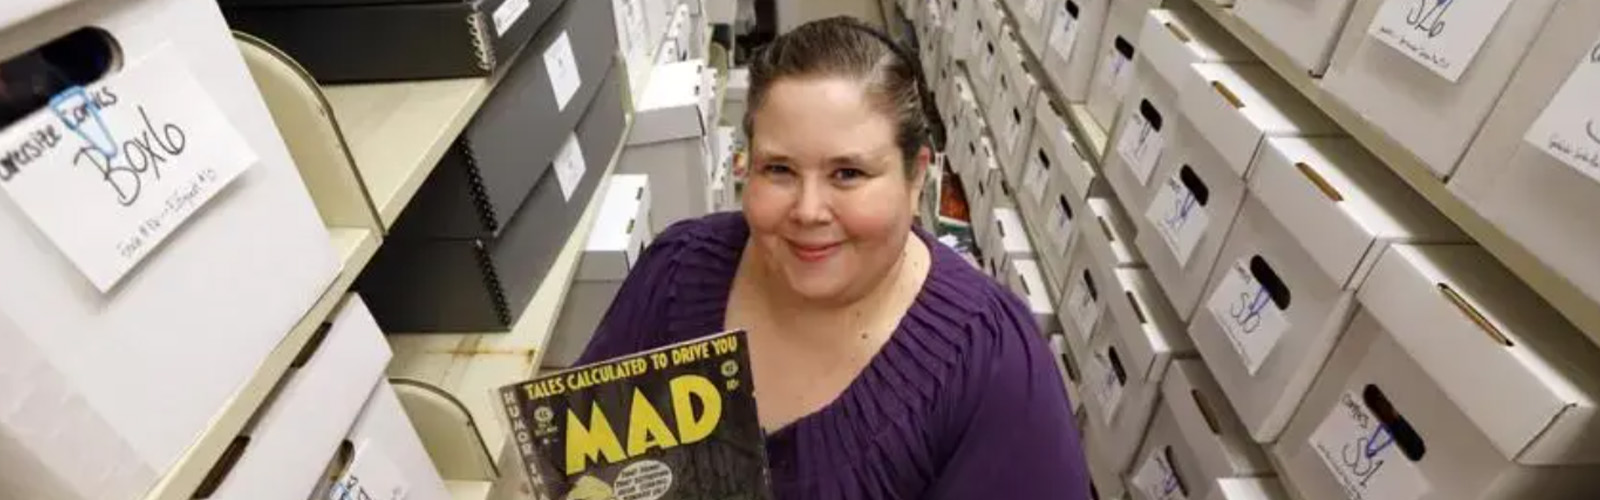 Cindy Jackson holding a MAD Magazine in the Comic Arts Collection at James Branch Cabell Library.